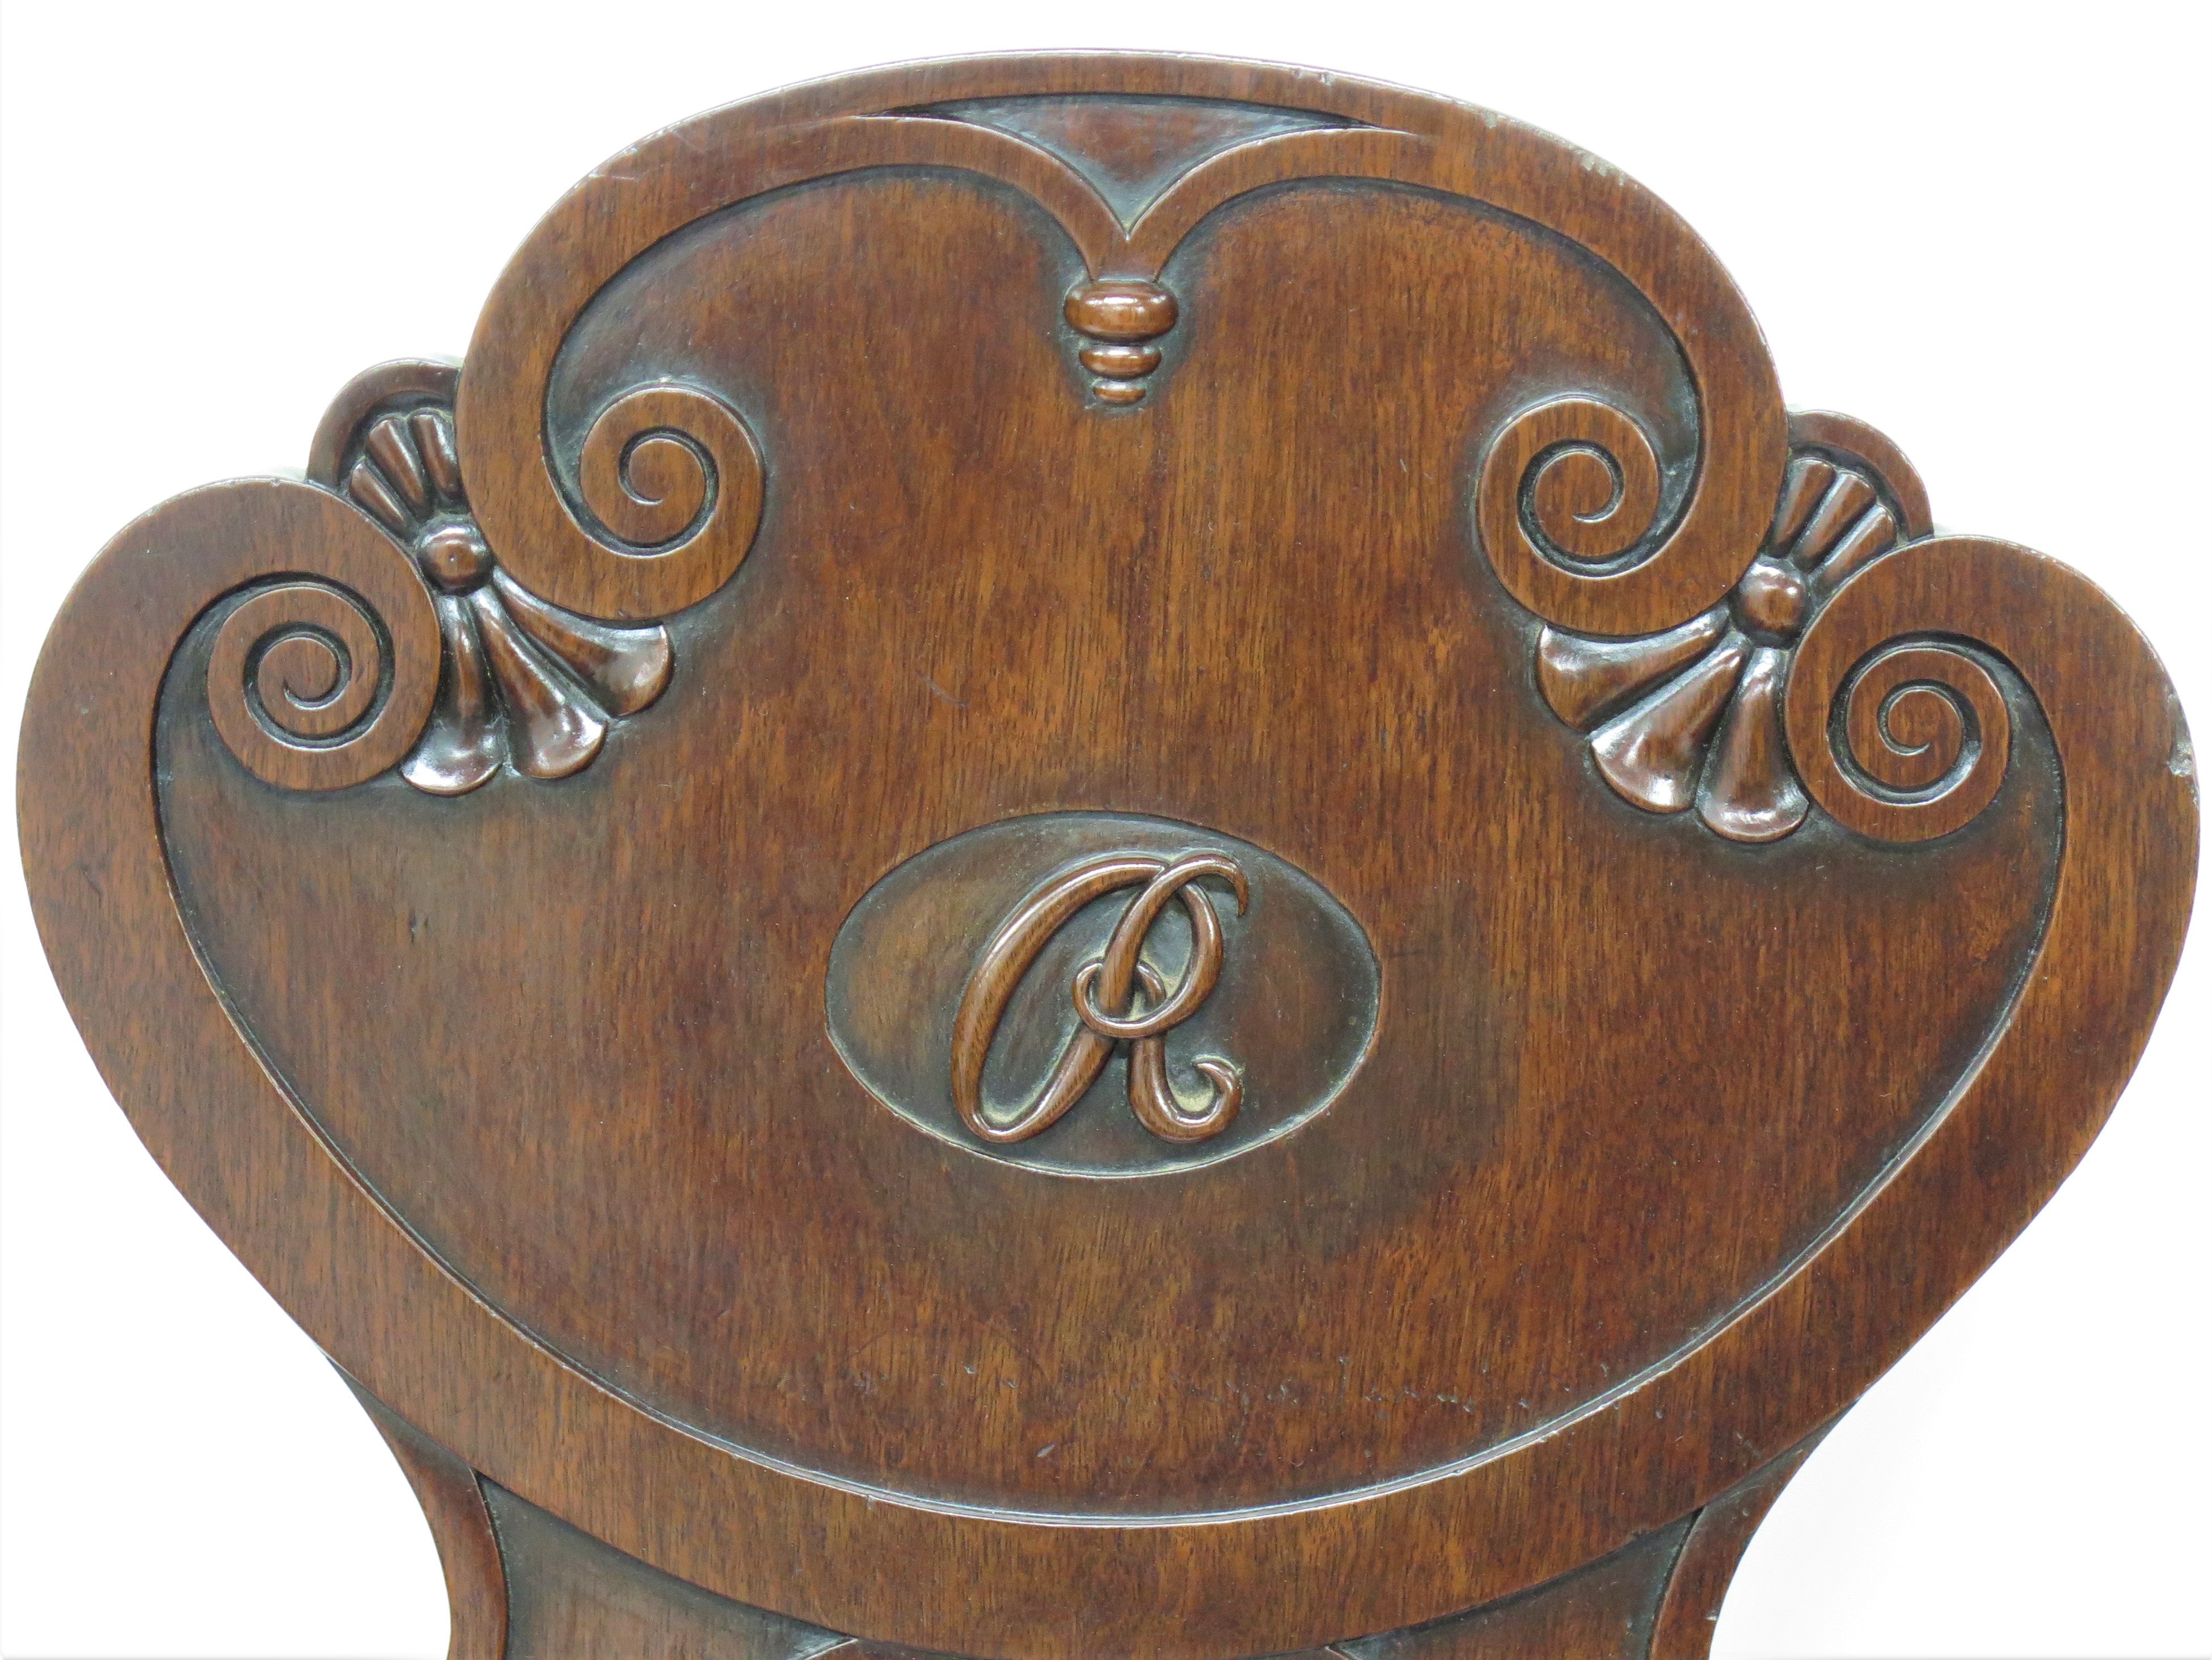 Pair of English Regency Monogrammed "R" Hall Chairs